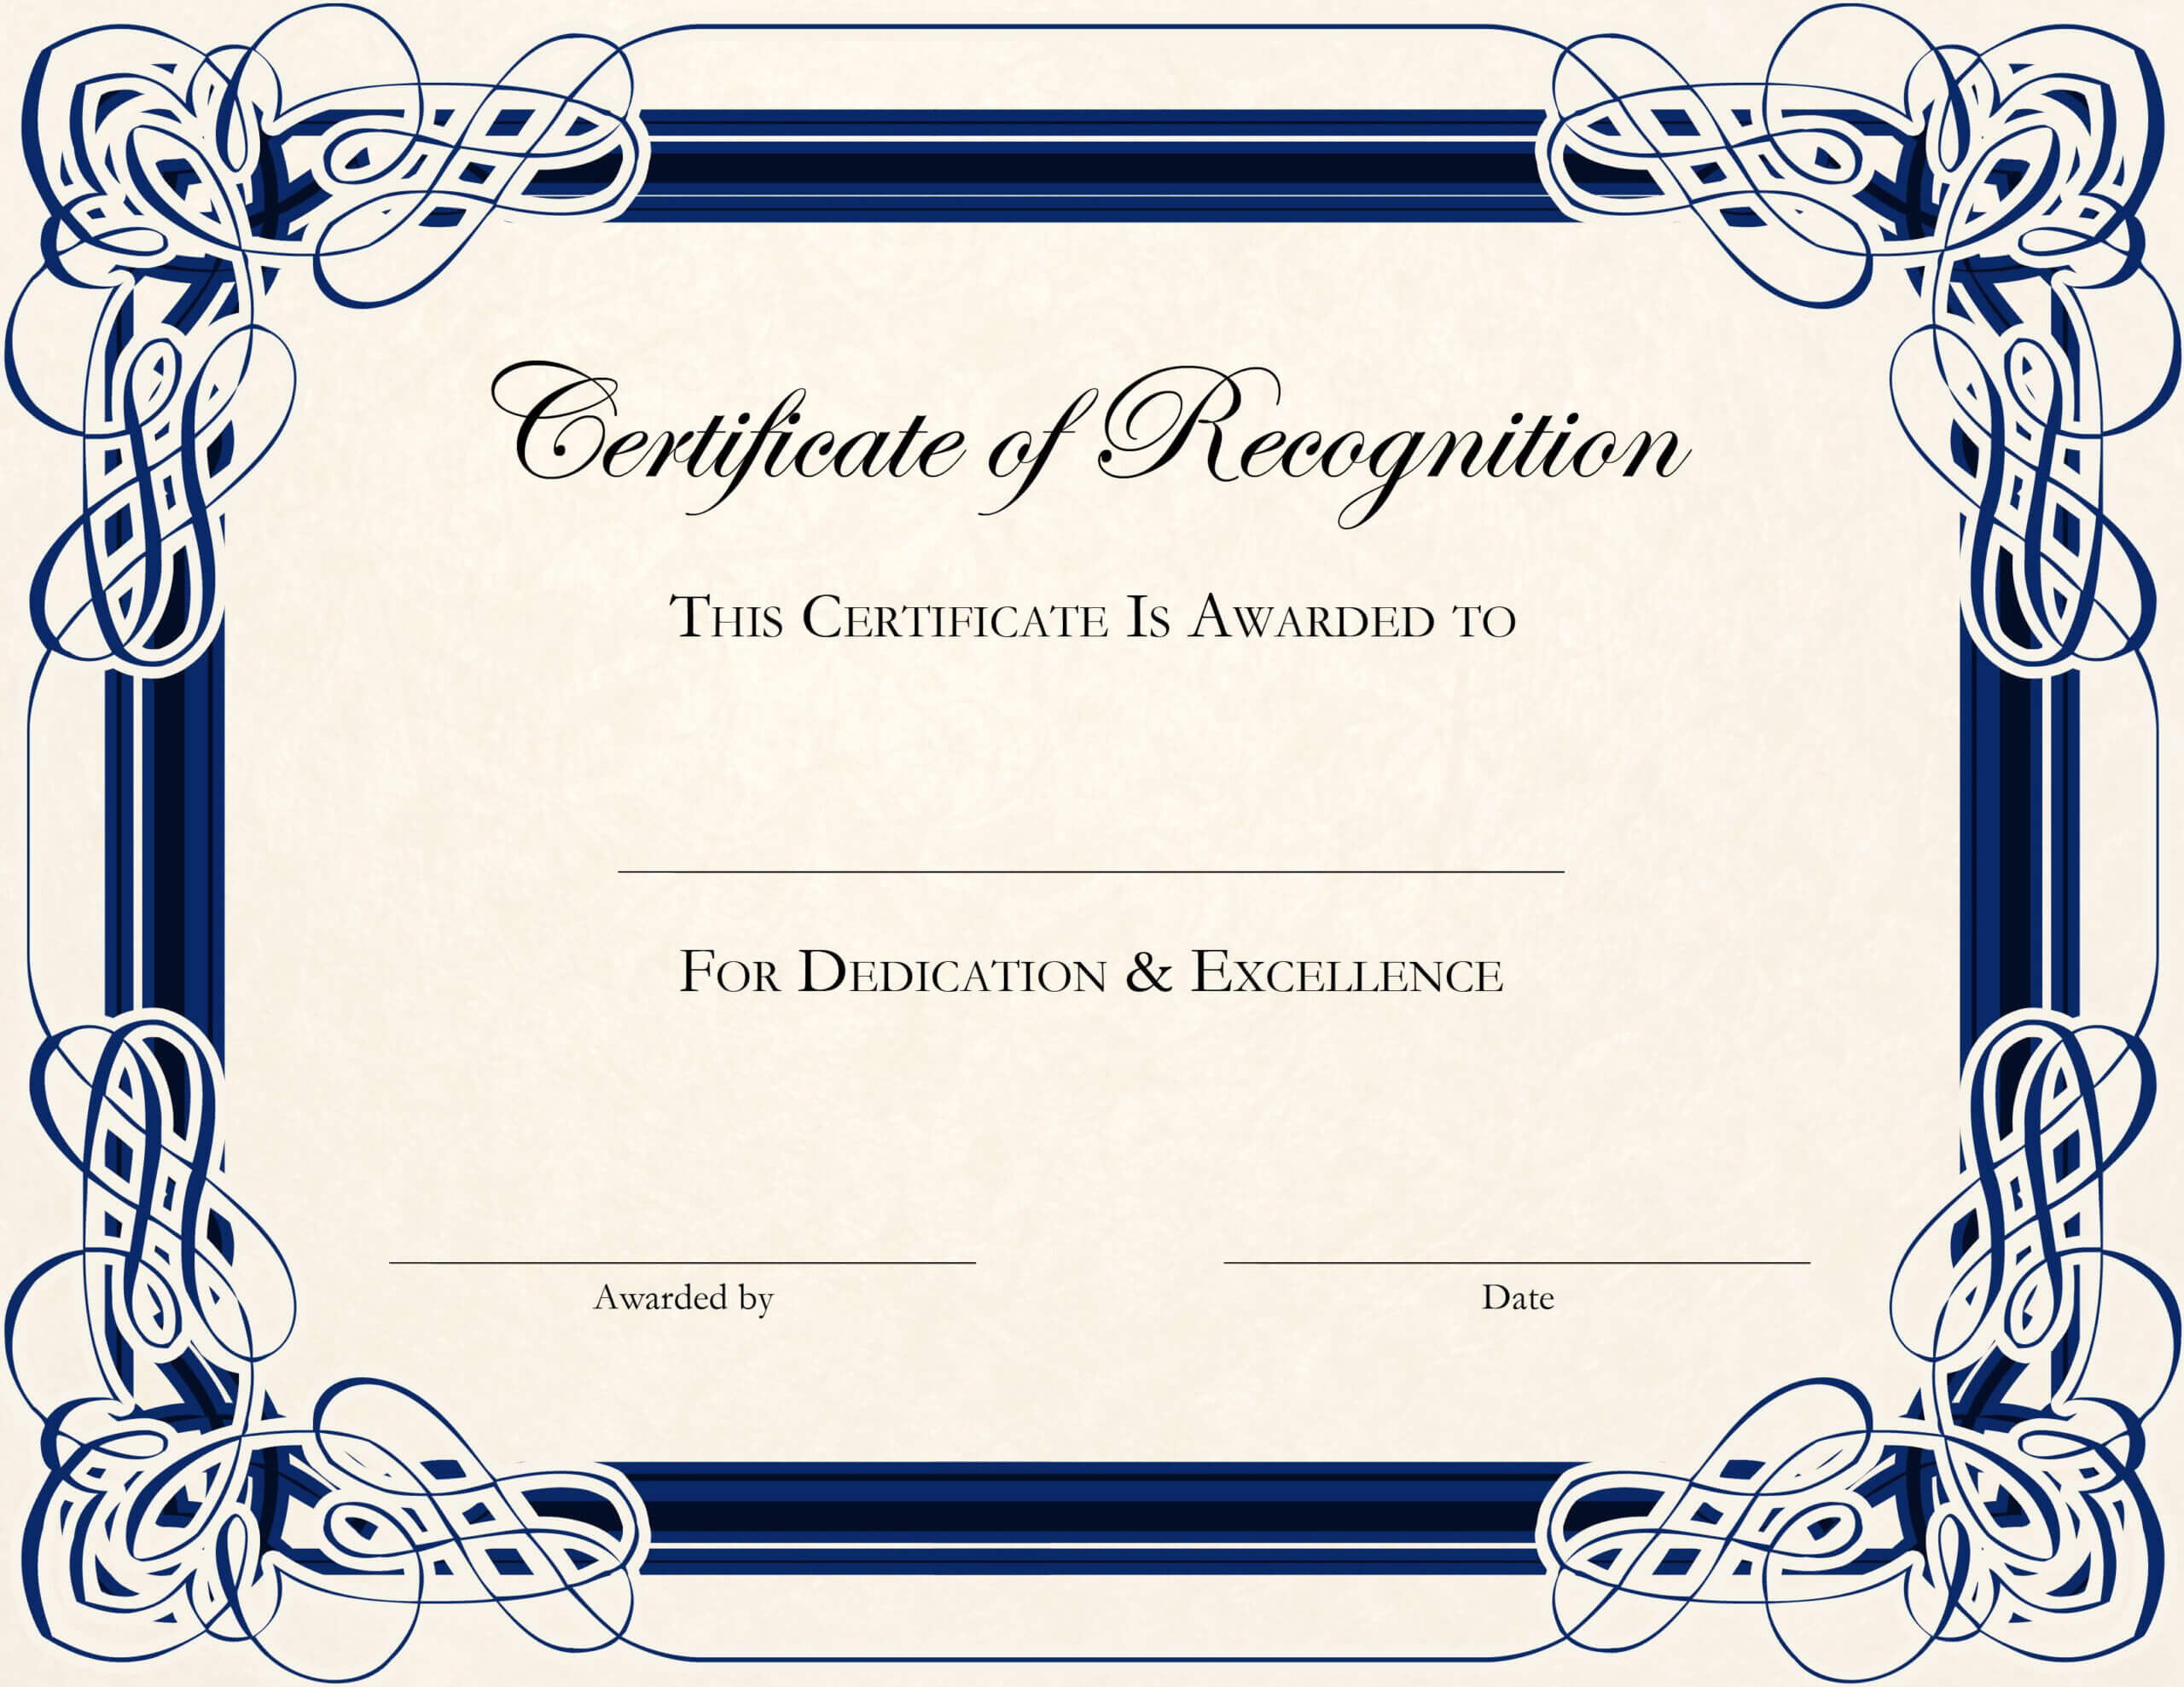 Certificate Template Designs Recognition Docs | Certificate Intended For Free Template For Certificate Of Recognition